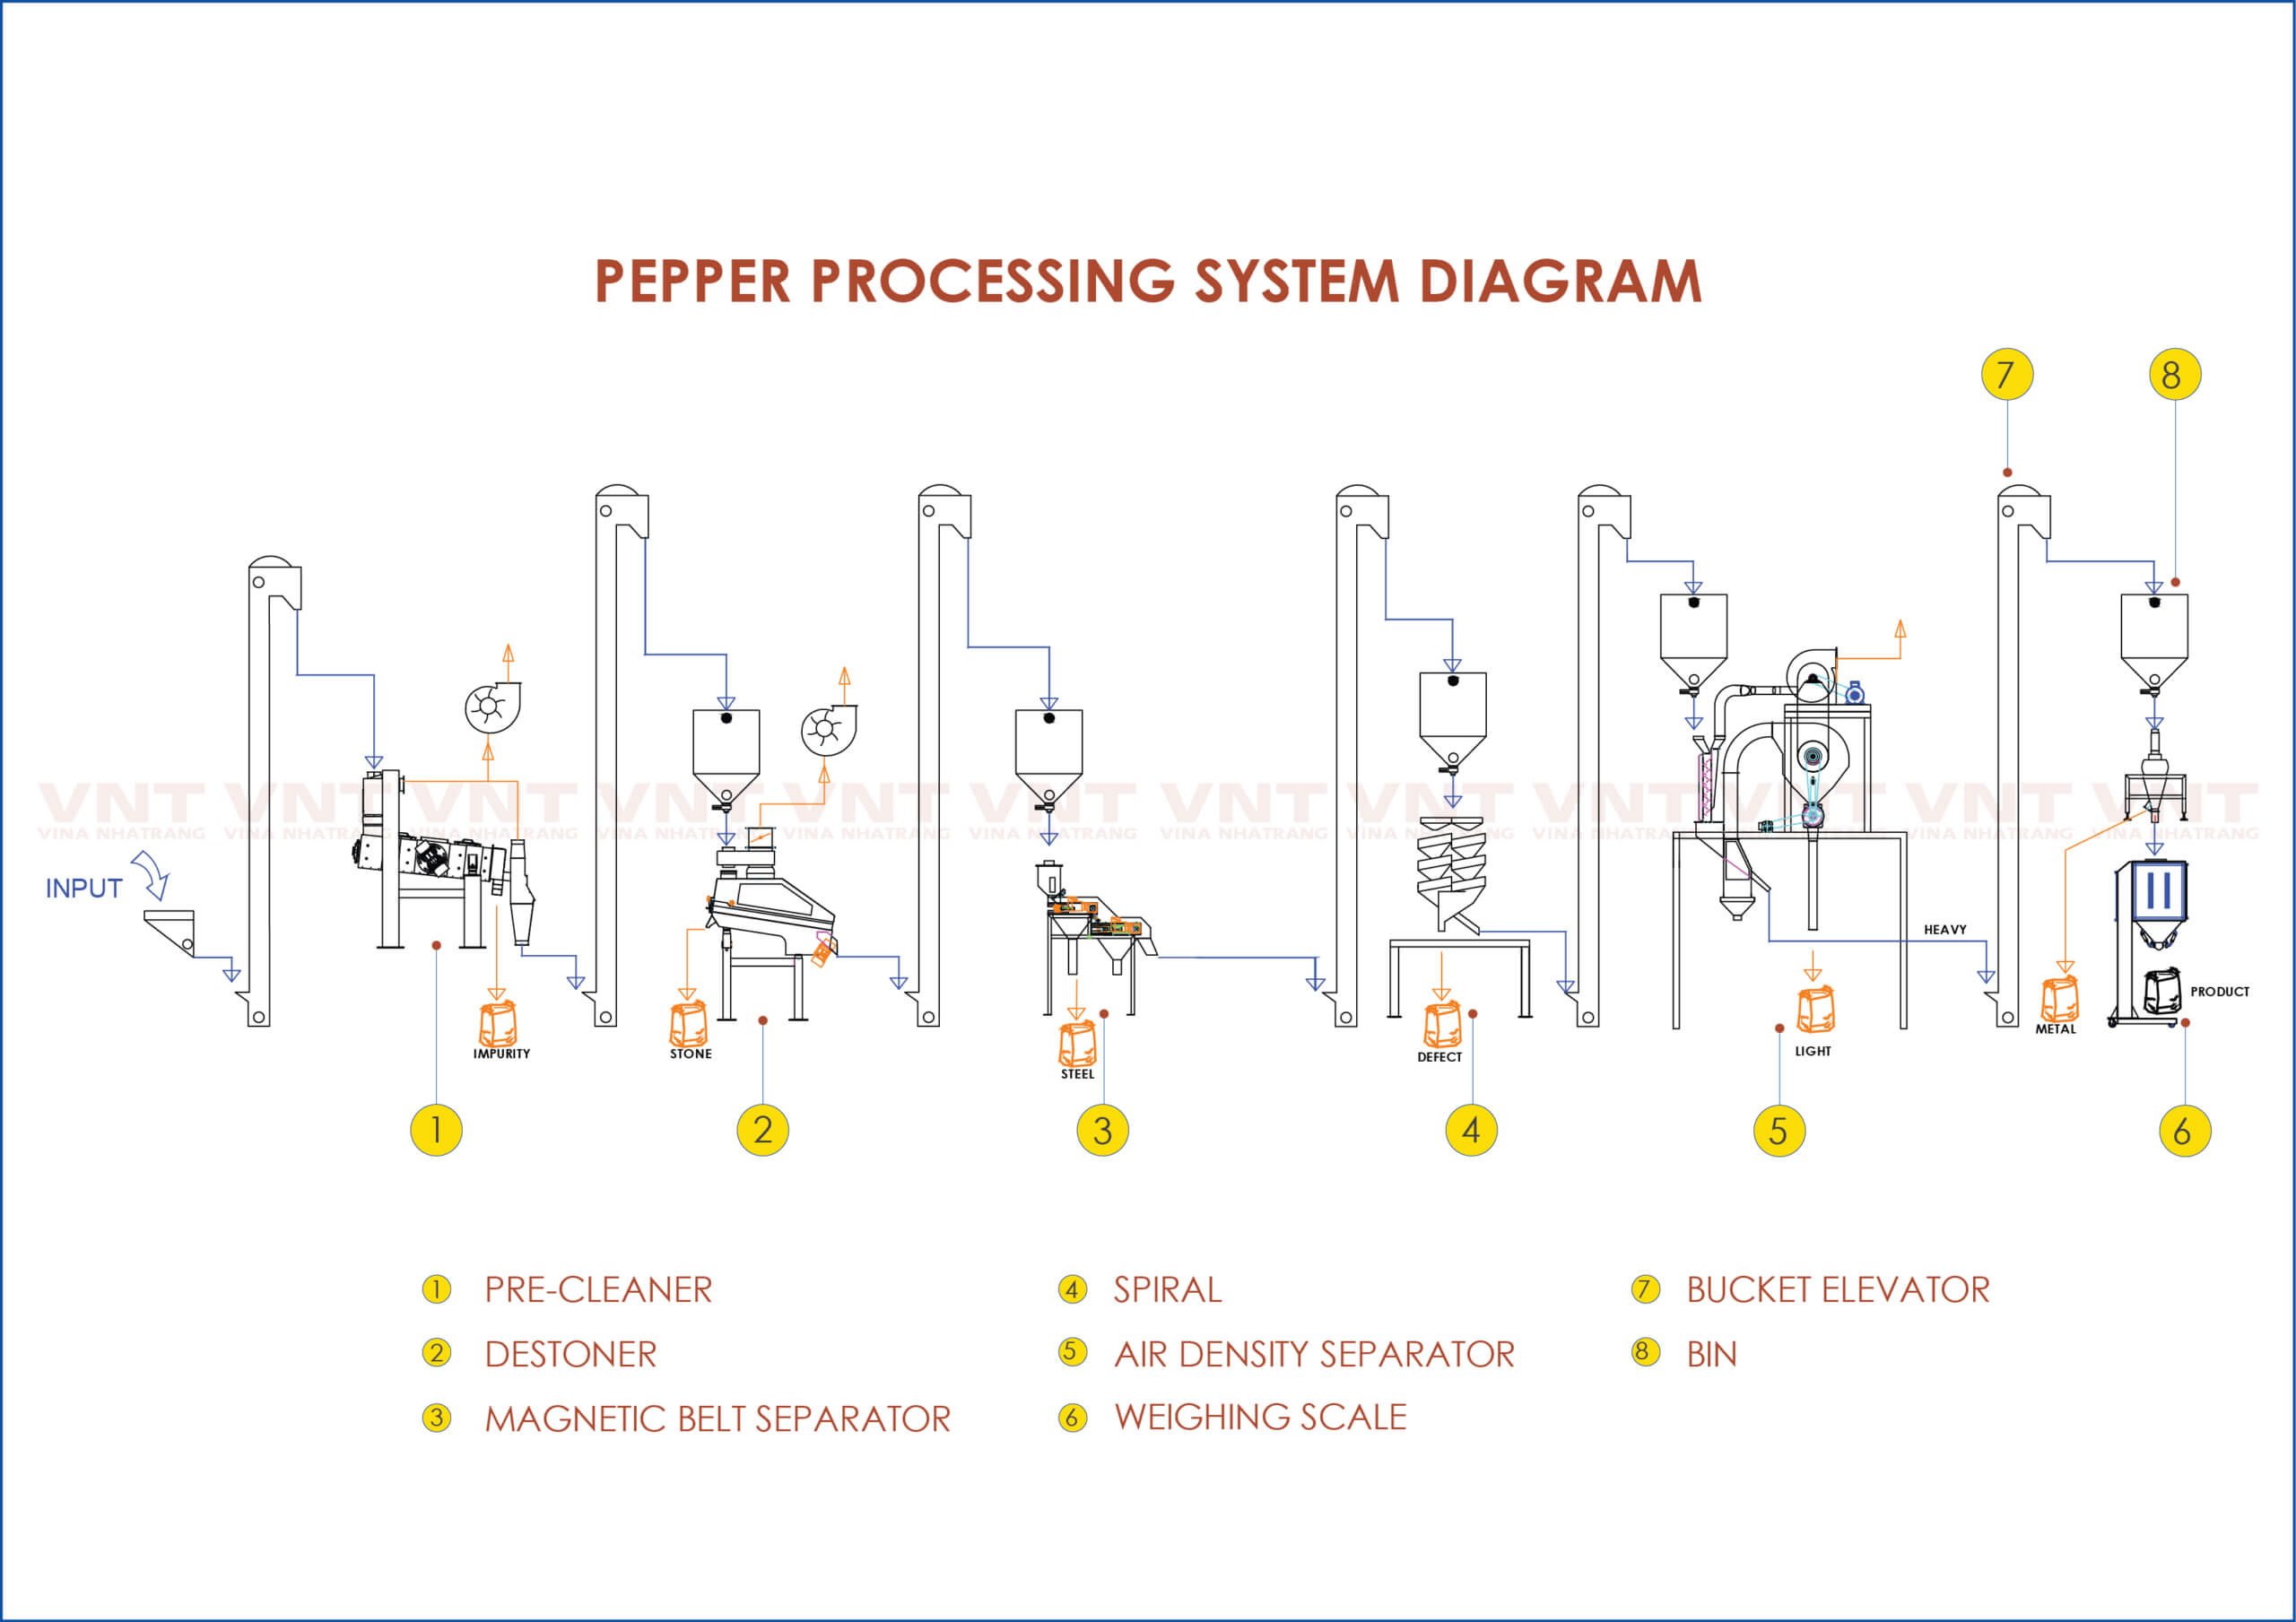 PEPPER PROCESSING SYSTEM